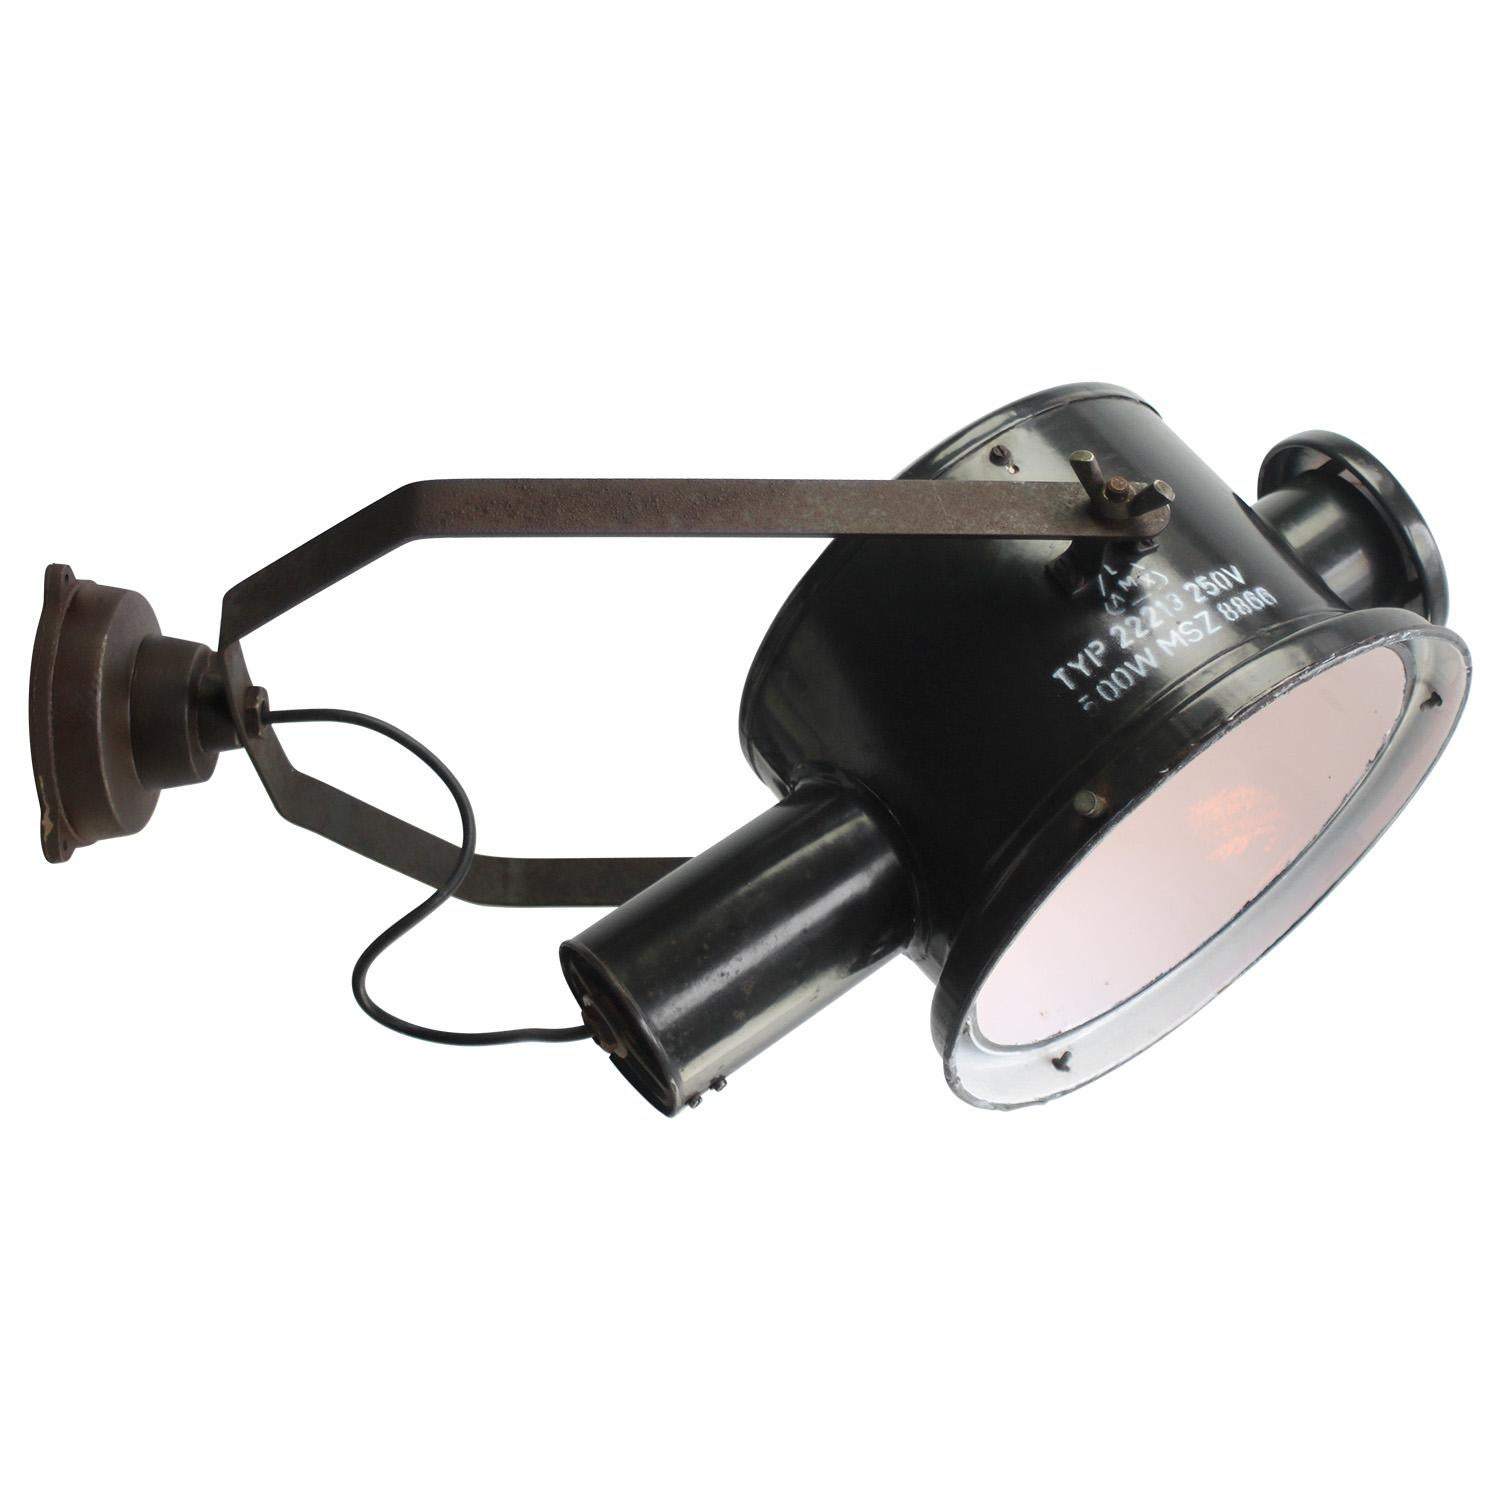 Black enamel, cast iron parts and wall piece
Adjustable industrial wall light

Diameter wall mount 12 cm

Weight: 6.20 kg / 13.7 lb

Priced per individual item. All lamps have been made suitable by international standards for incandescent light